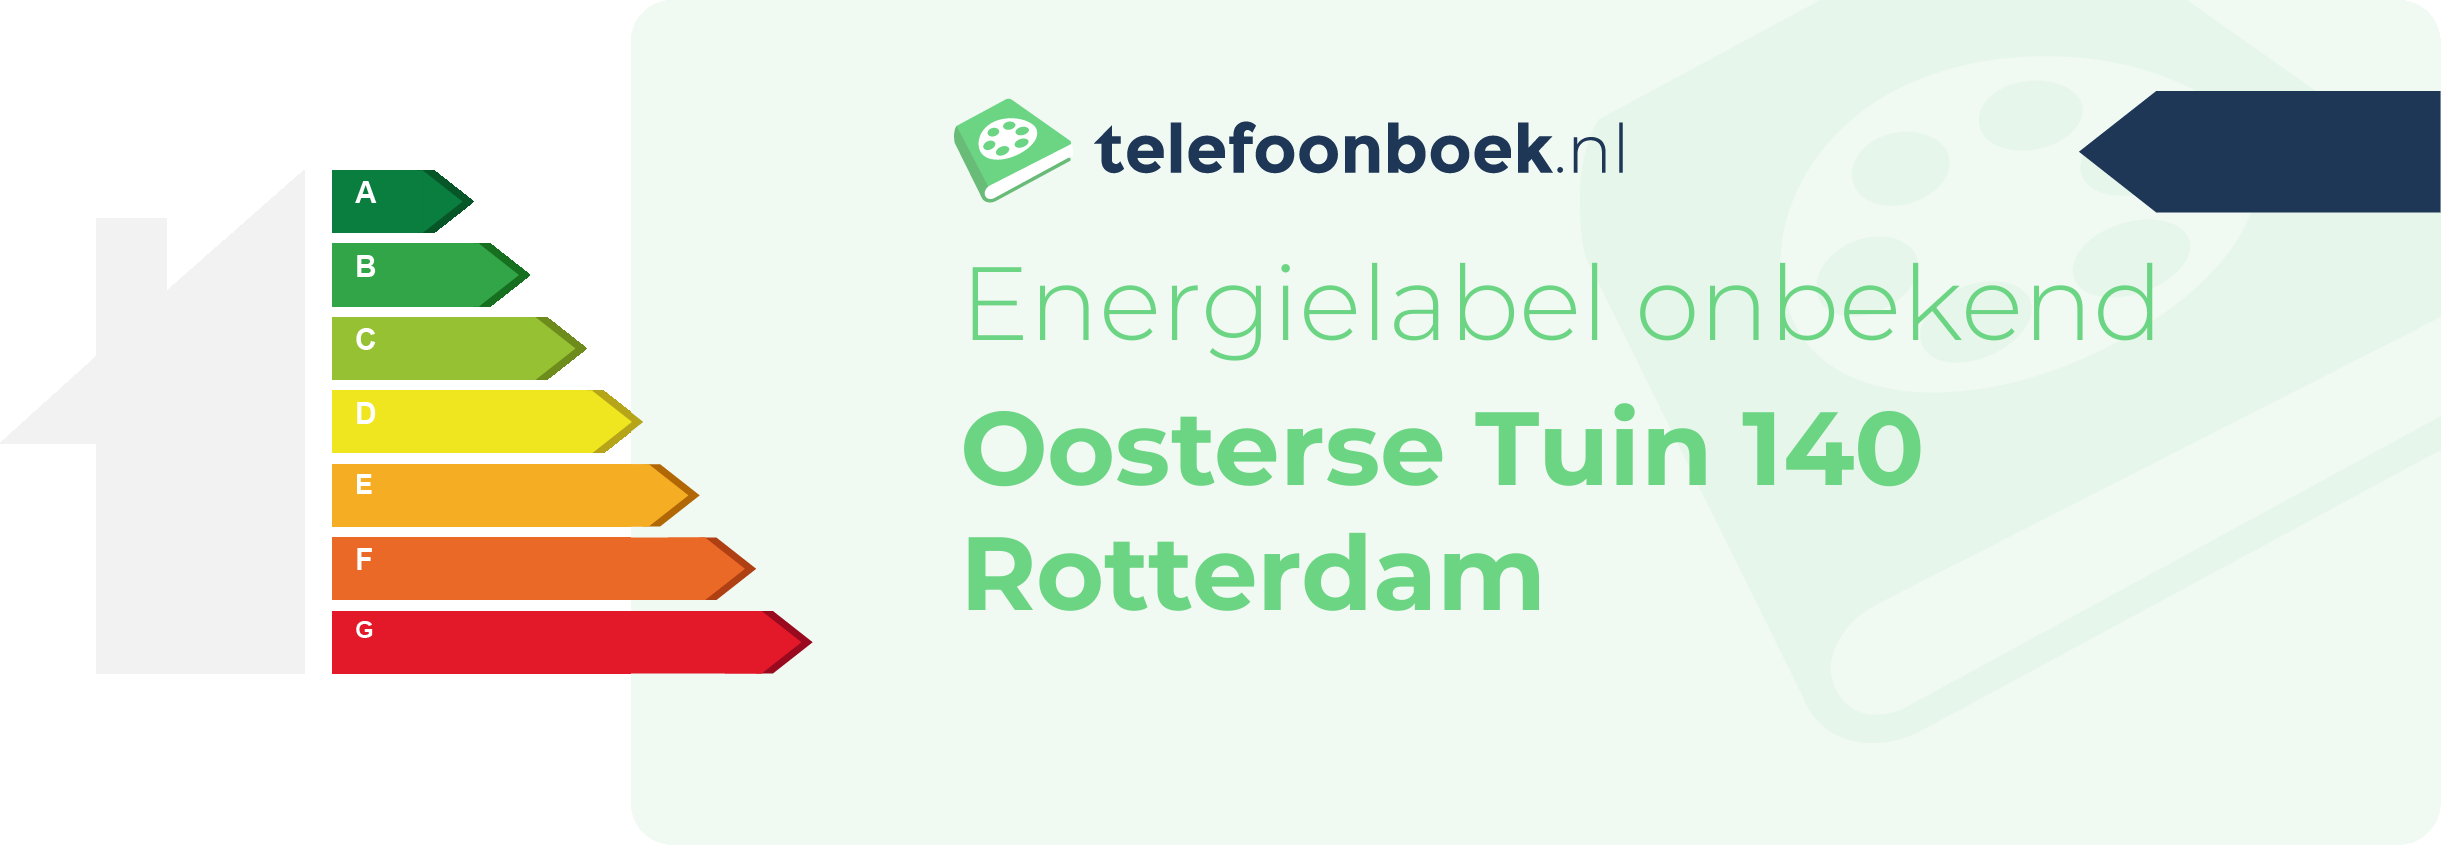 Energielabel Oosterse Tuin 140 Rotterdam